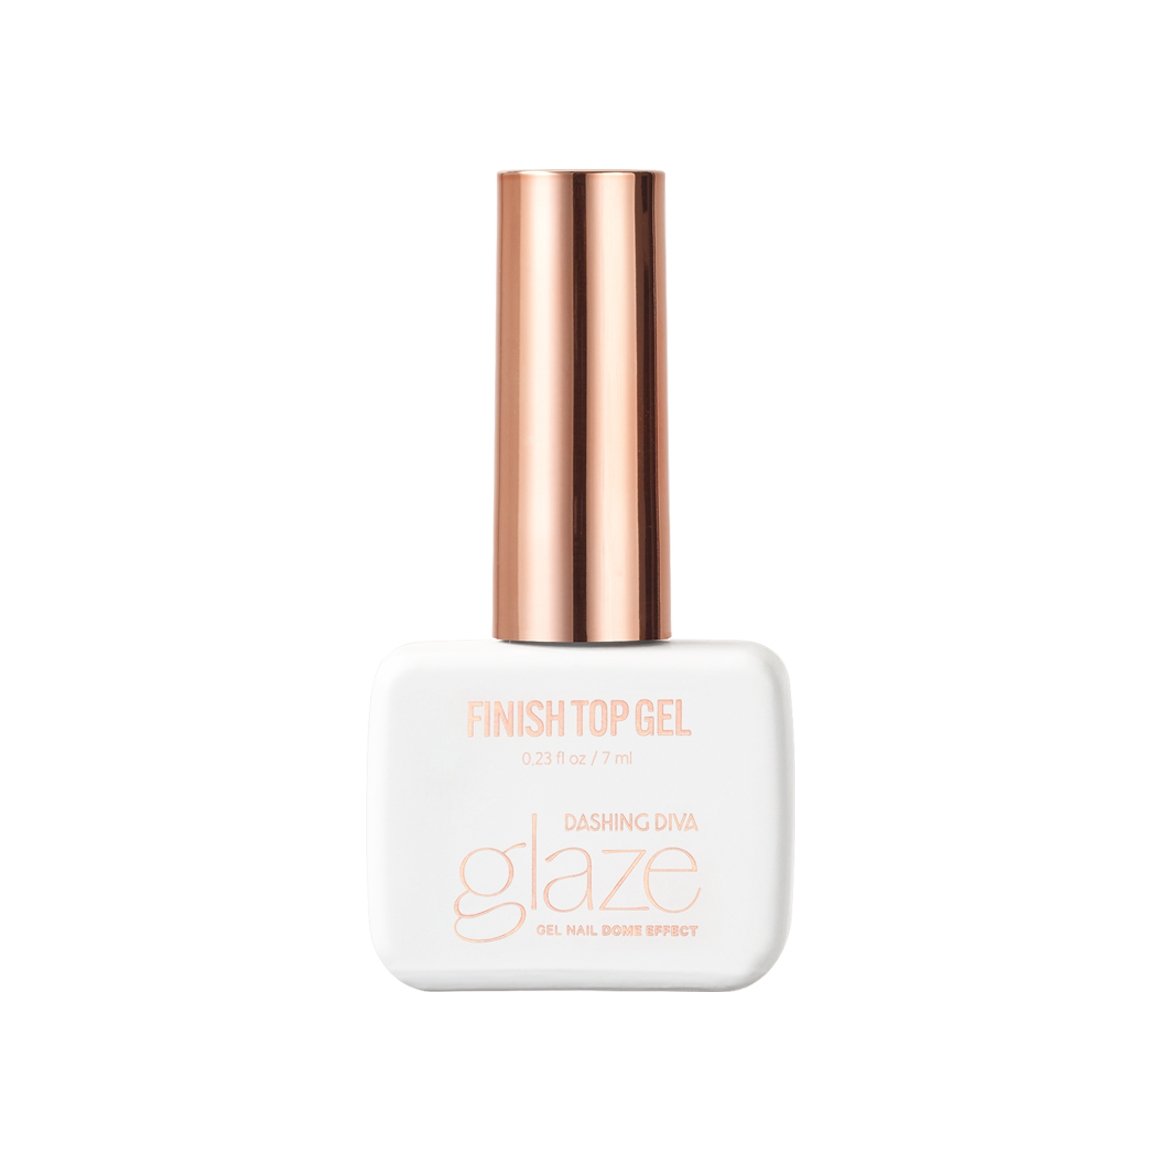 Finish Top Gel (Top Coat for Glaze) - Tools &amp; Care - Nail Care - Dashing Diva Singapore